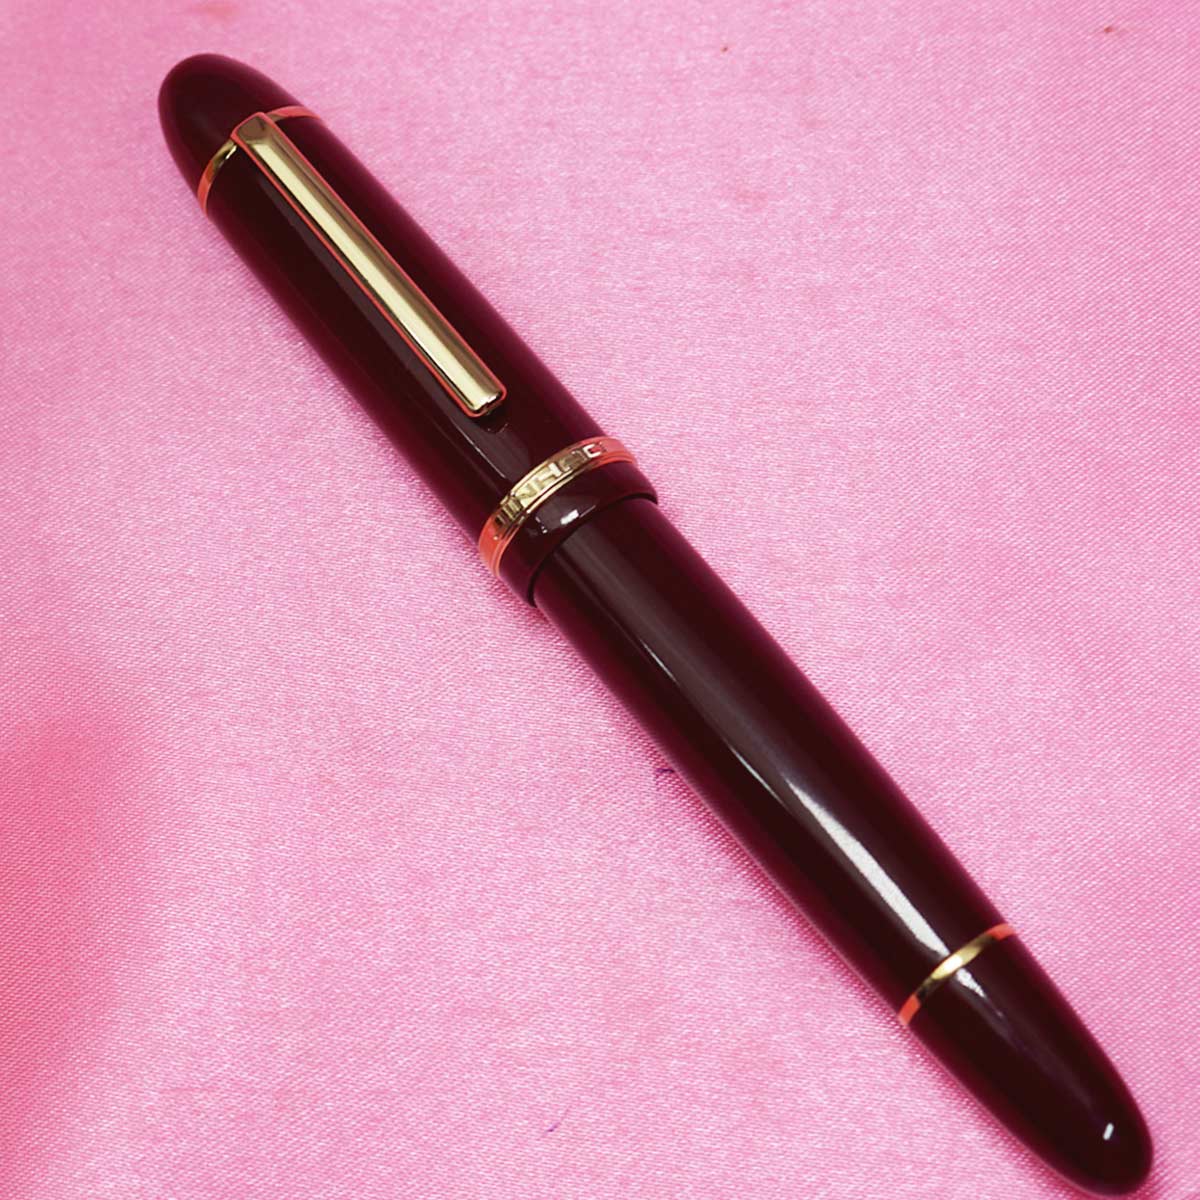 Jinhao X159 Glossy Brown Color Body With No 40 Fine Tipped  Nib With Gold Trims Converter Type Fountain Pen SKU 23262